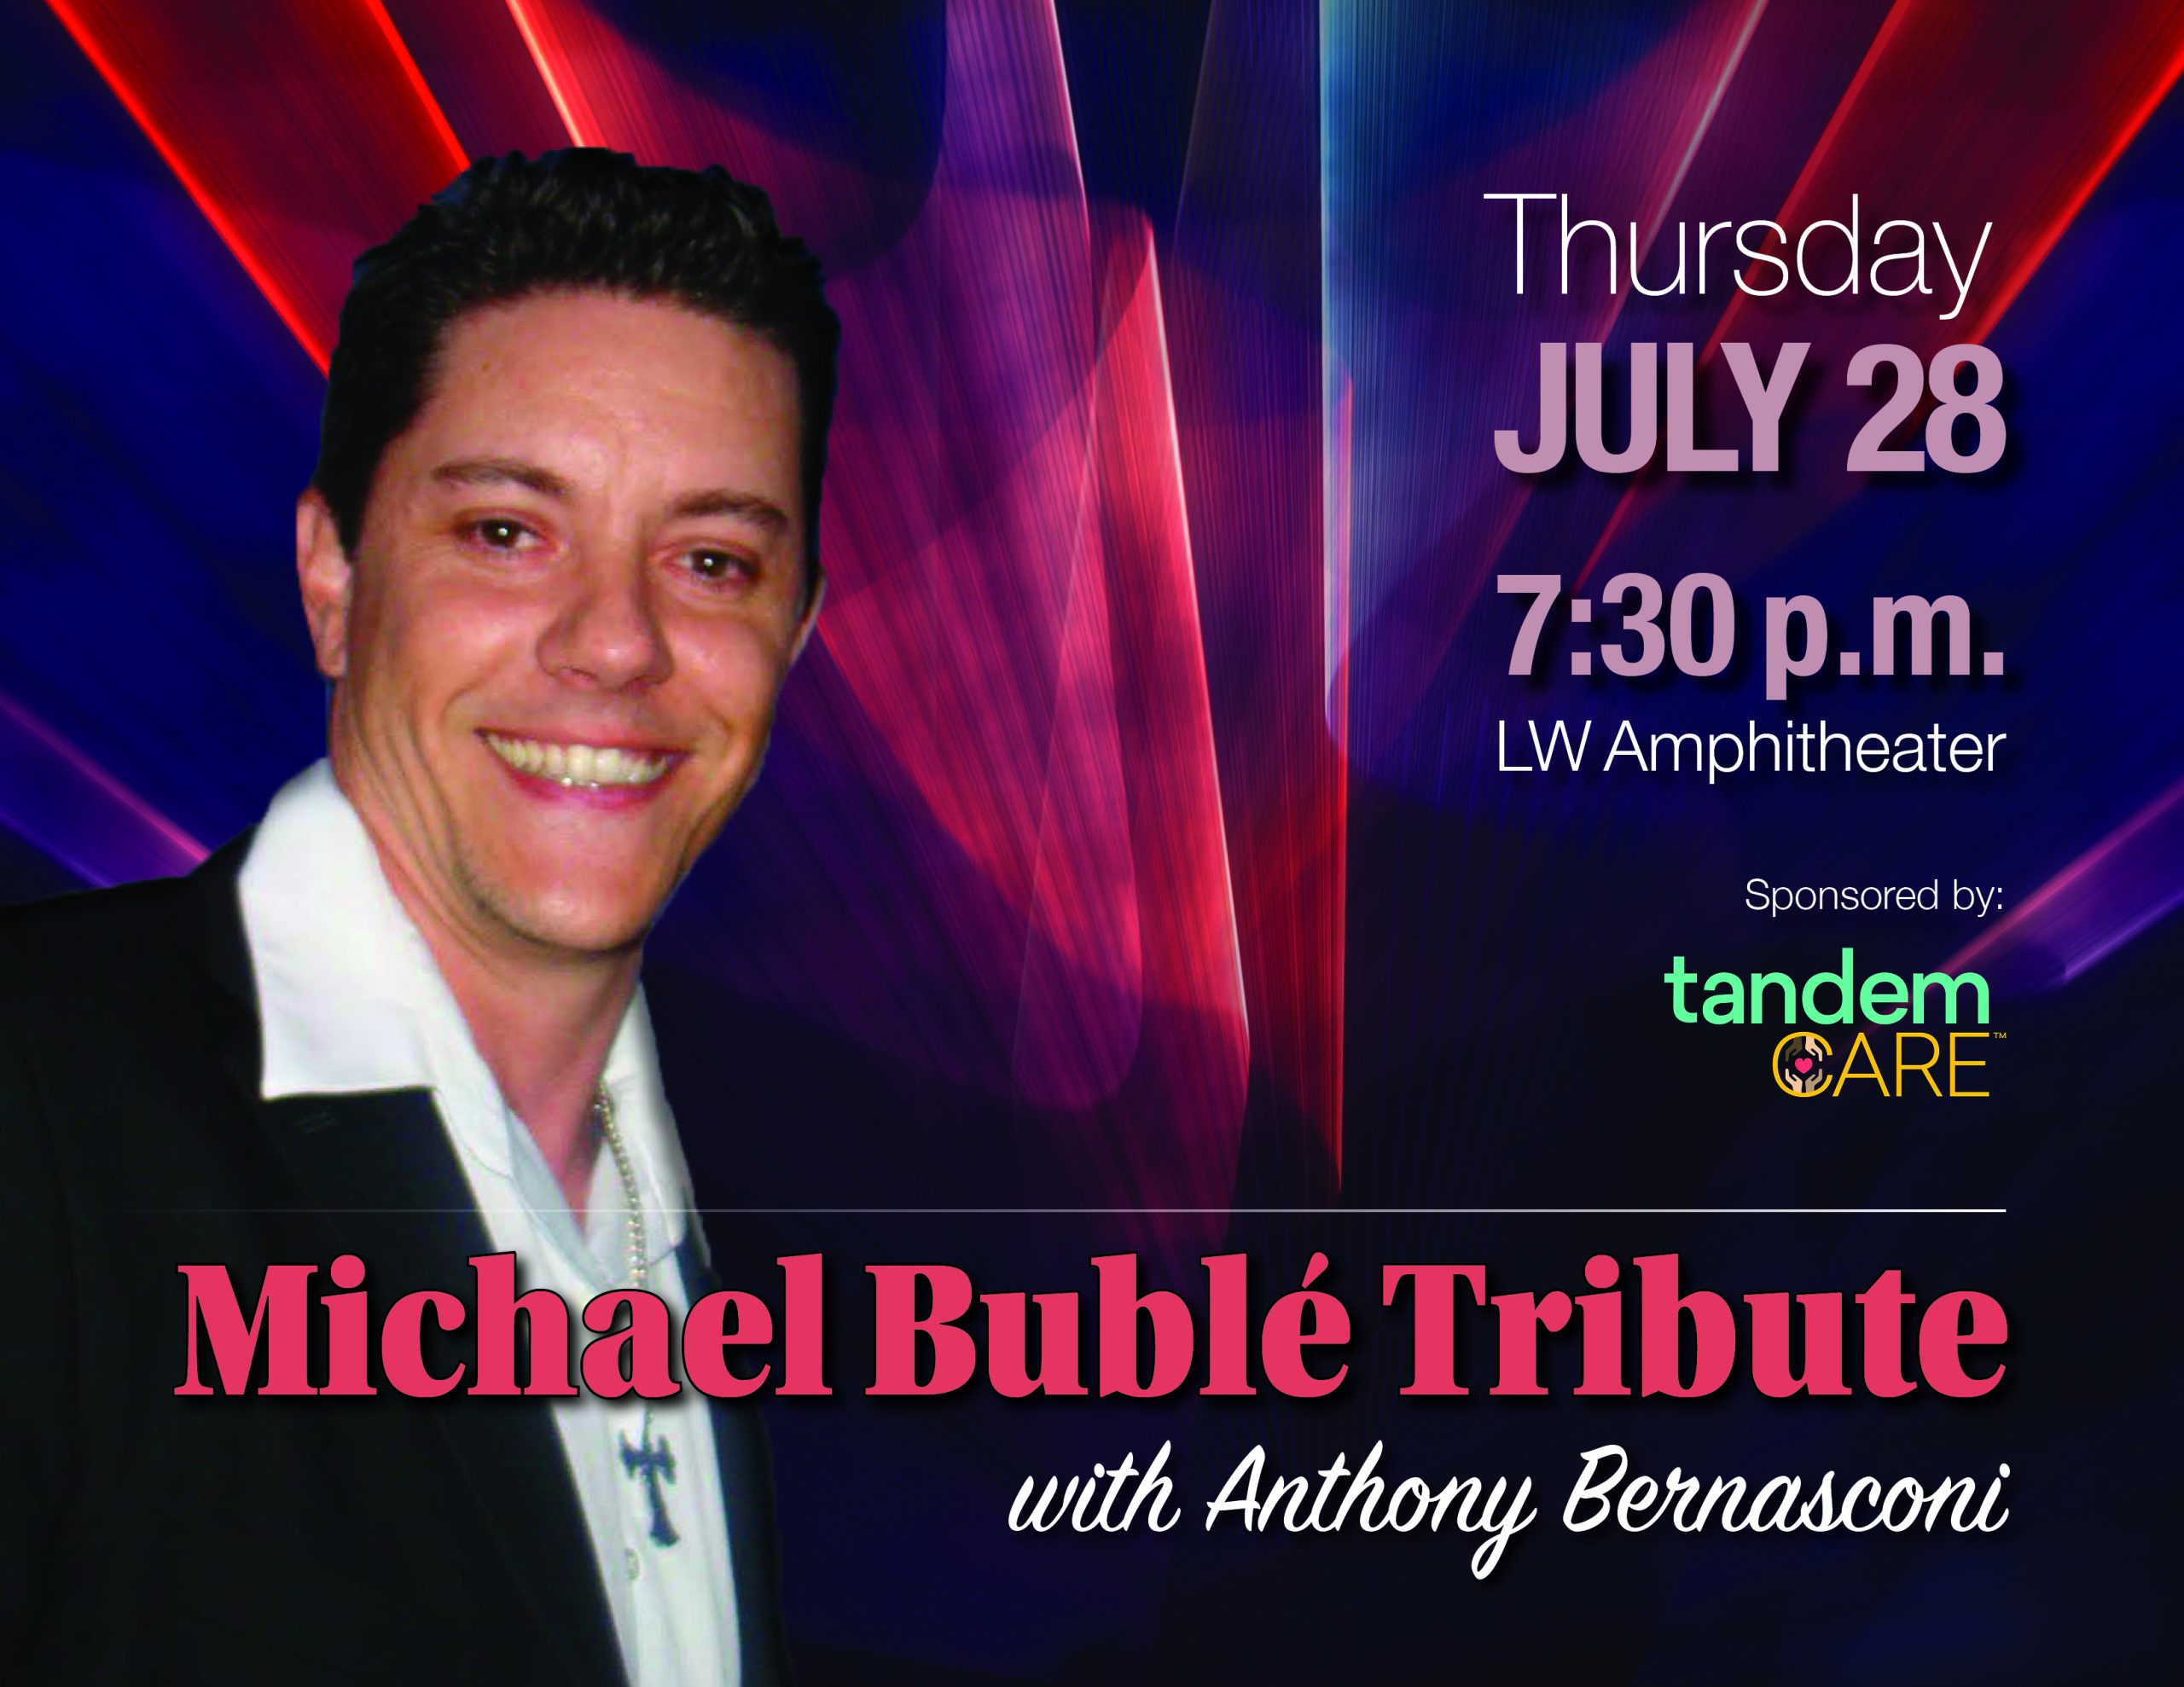 Updated Michael Buble flyer 07-28